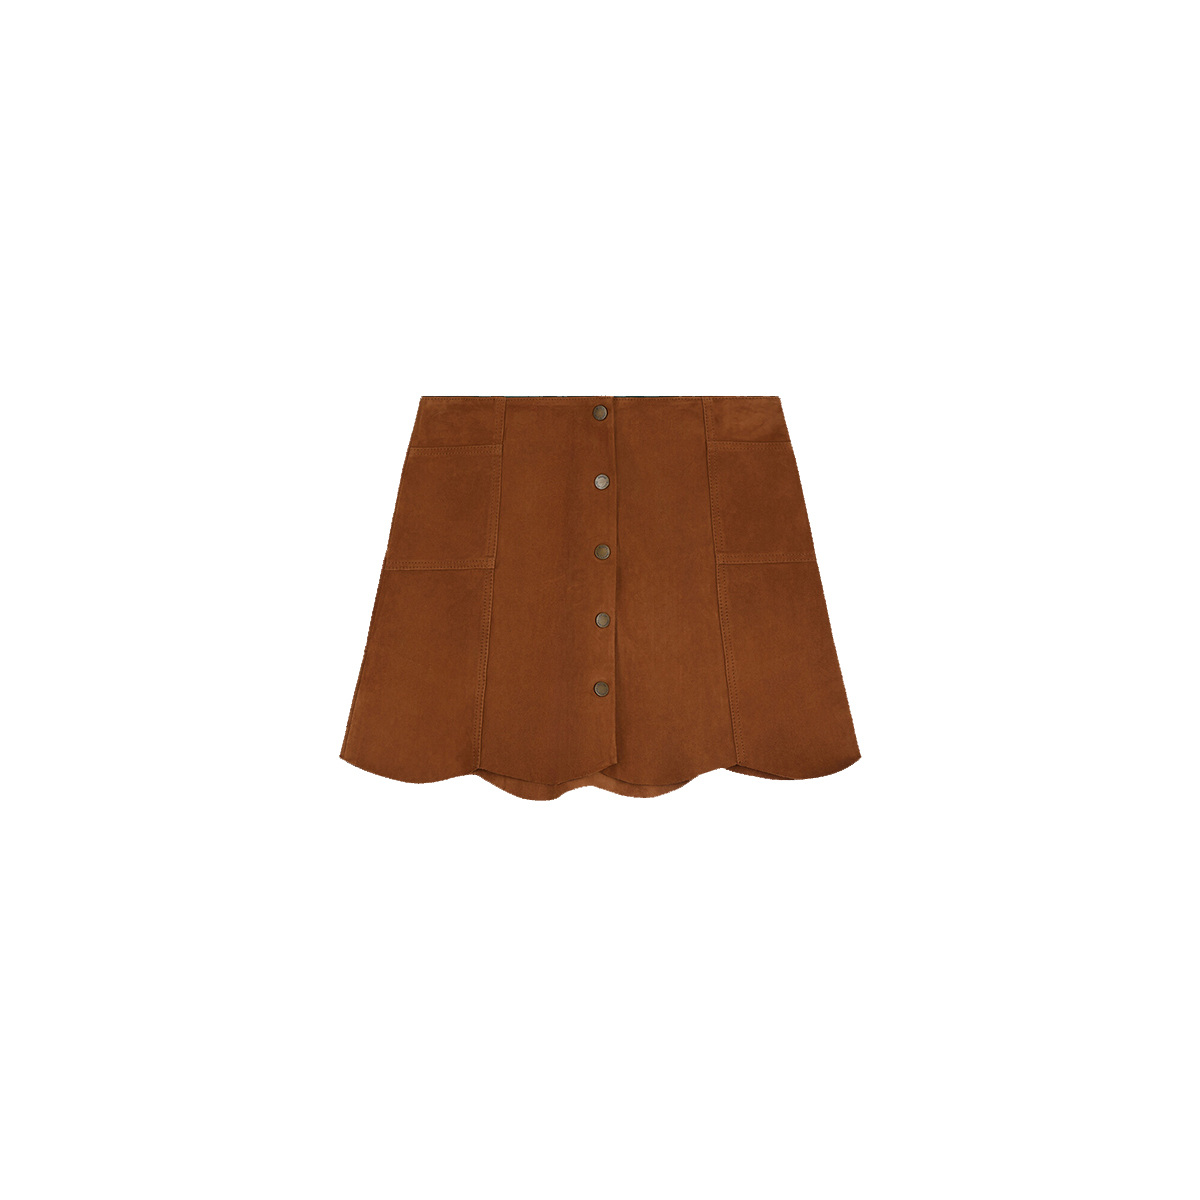 Sophia Suede Skirt, Camel - A-line cut - Suede leather - image 1